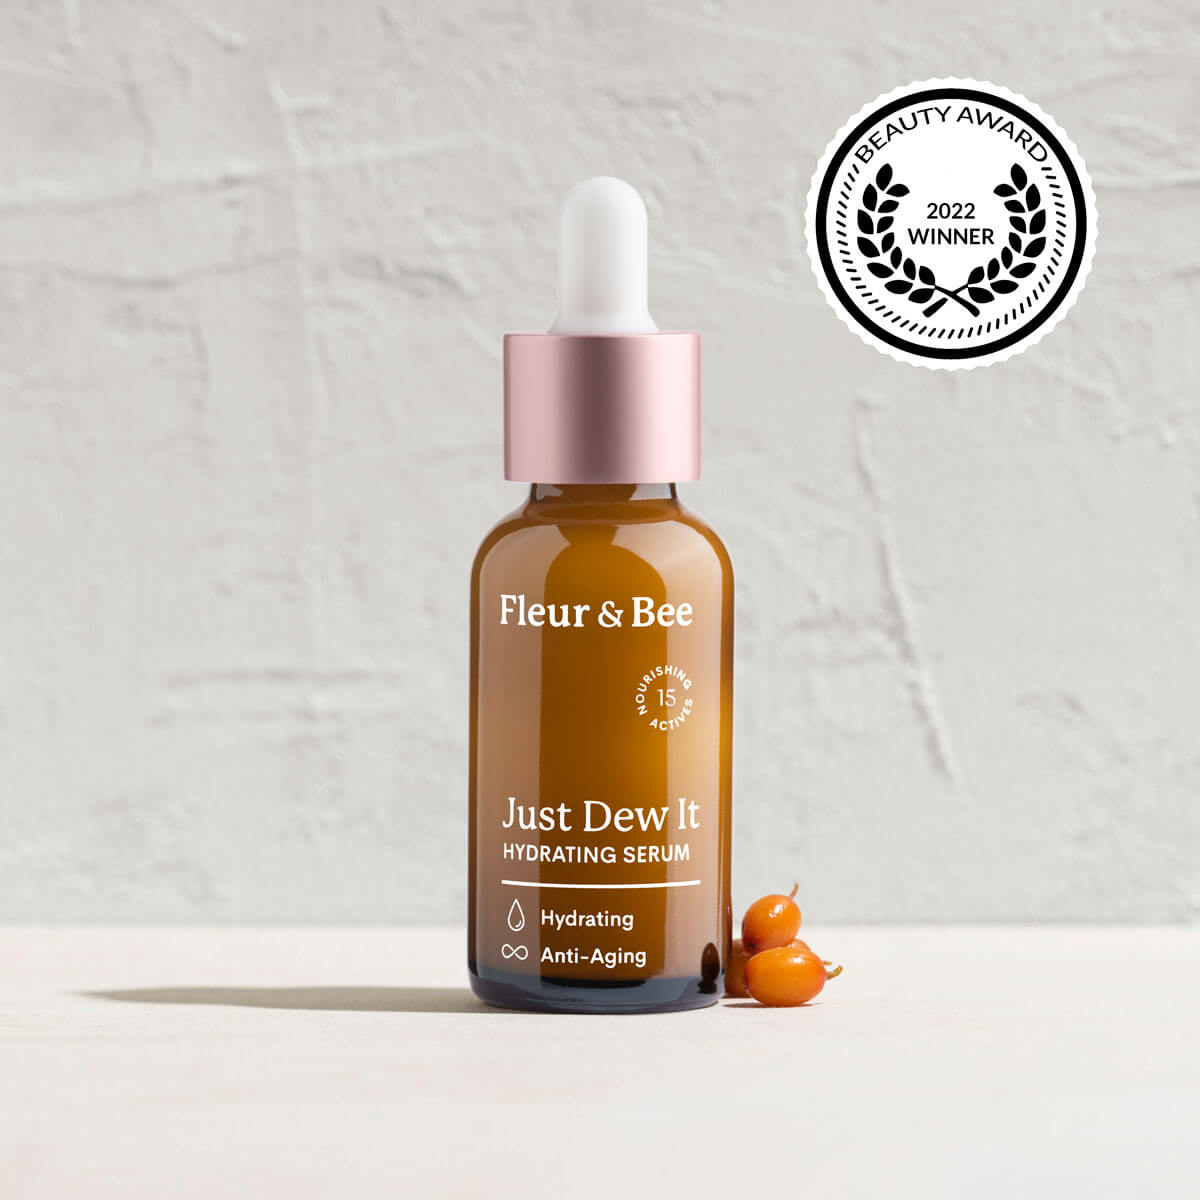 Just Dew It, a natural Hydrating Serum by Fleur & Bee